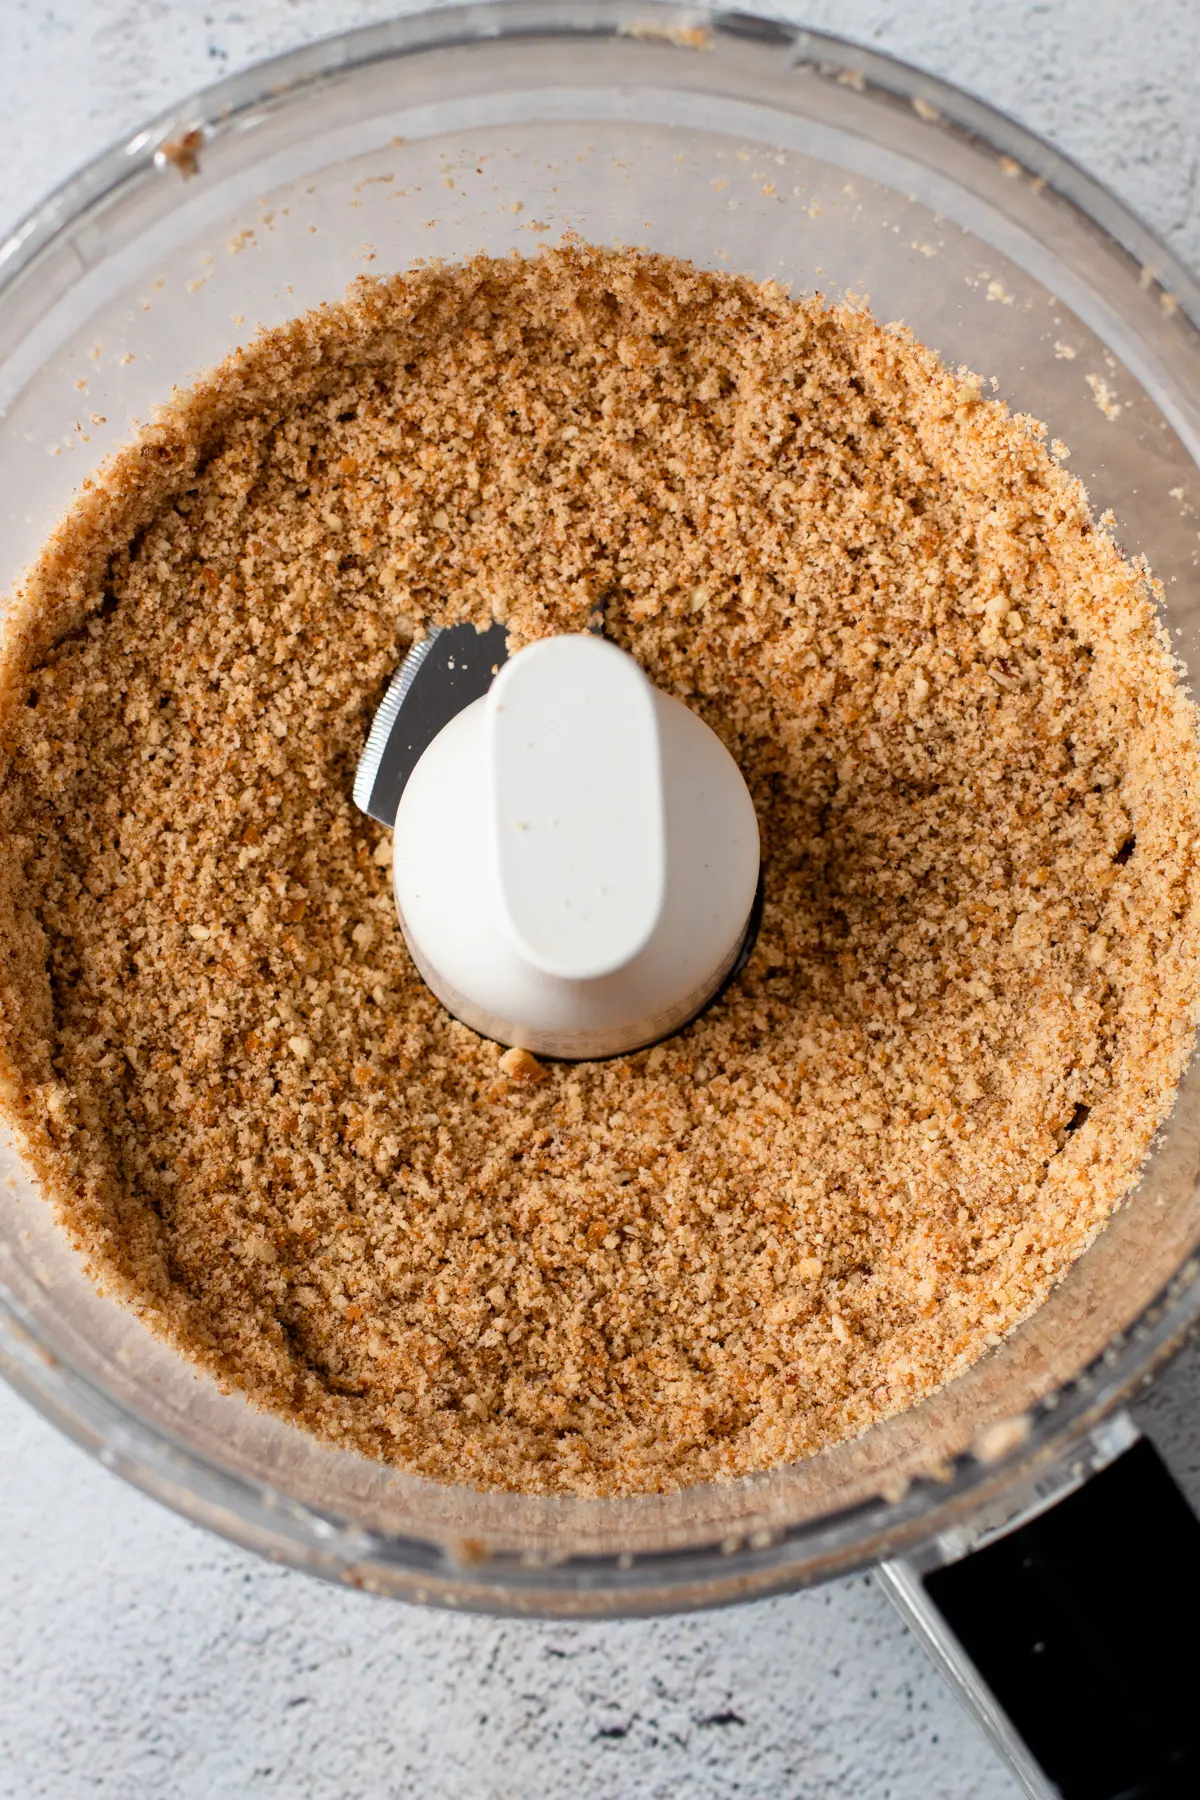 Ground up Nilla wafers in a food processor.